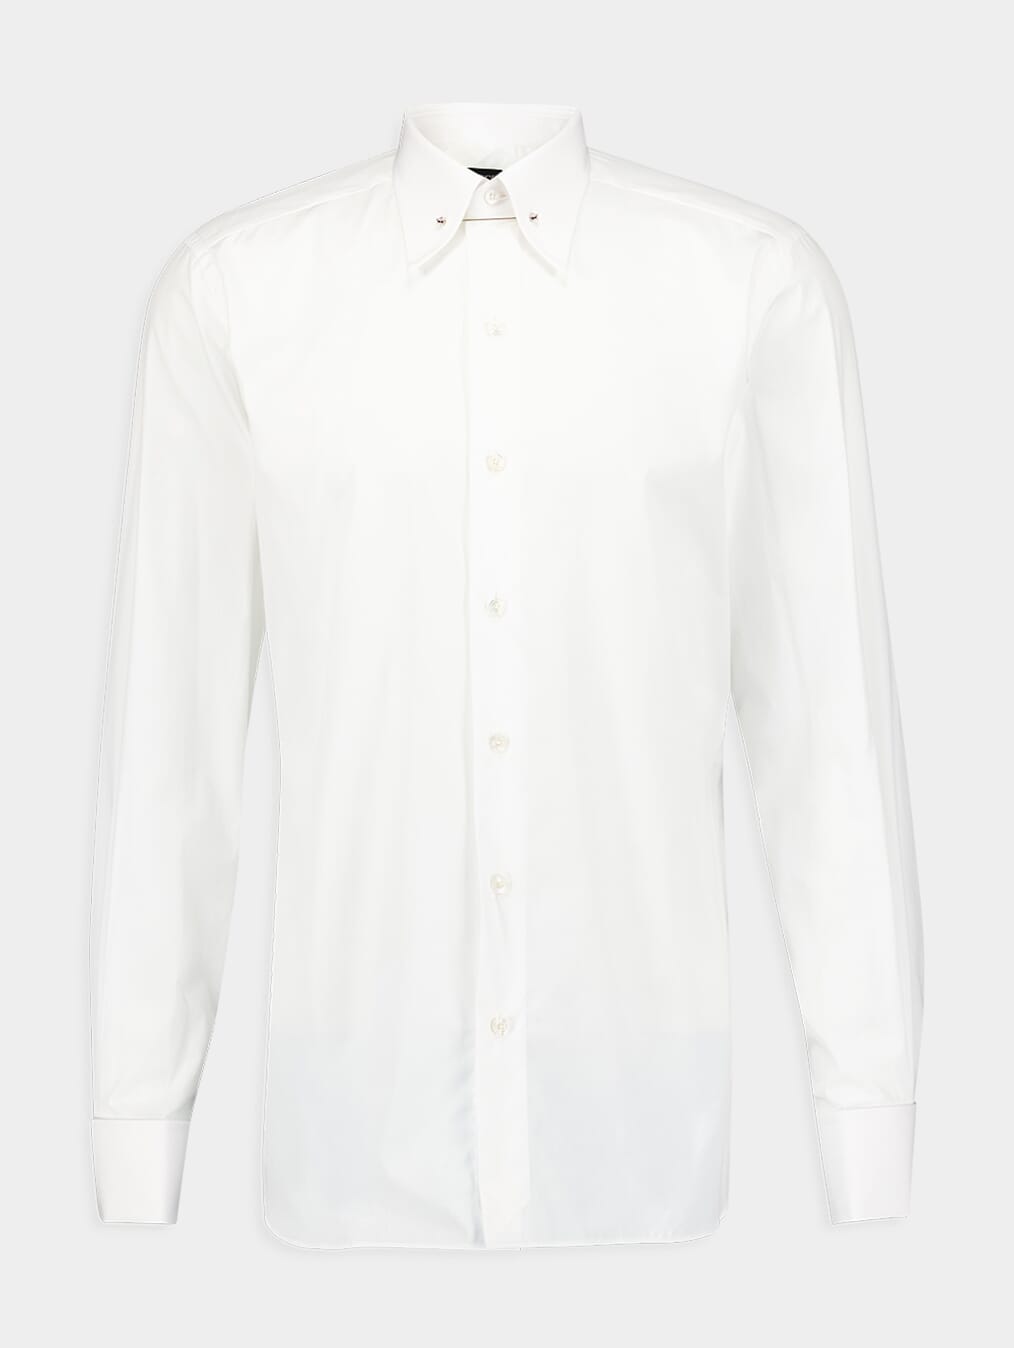 Tom FordLong-Sleeve Cotton Shirt at Fashion Clinic